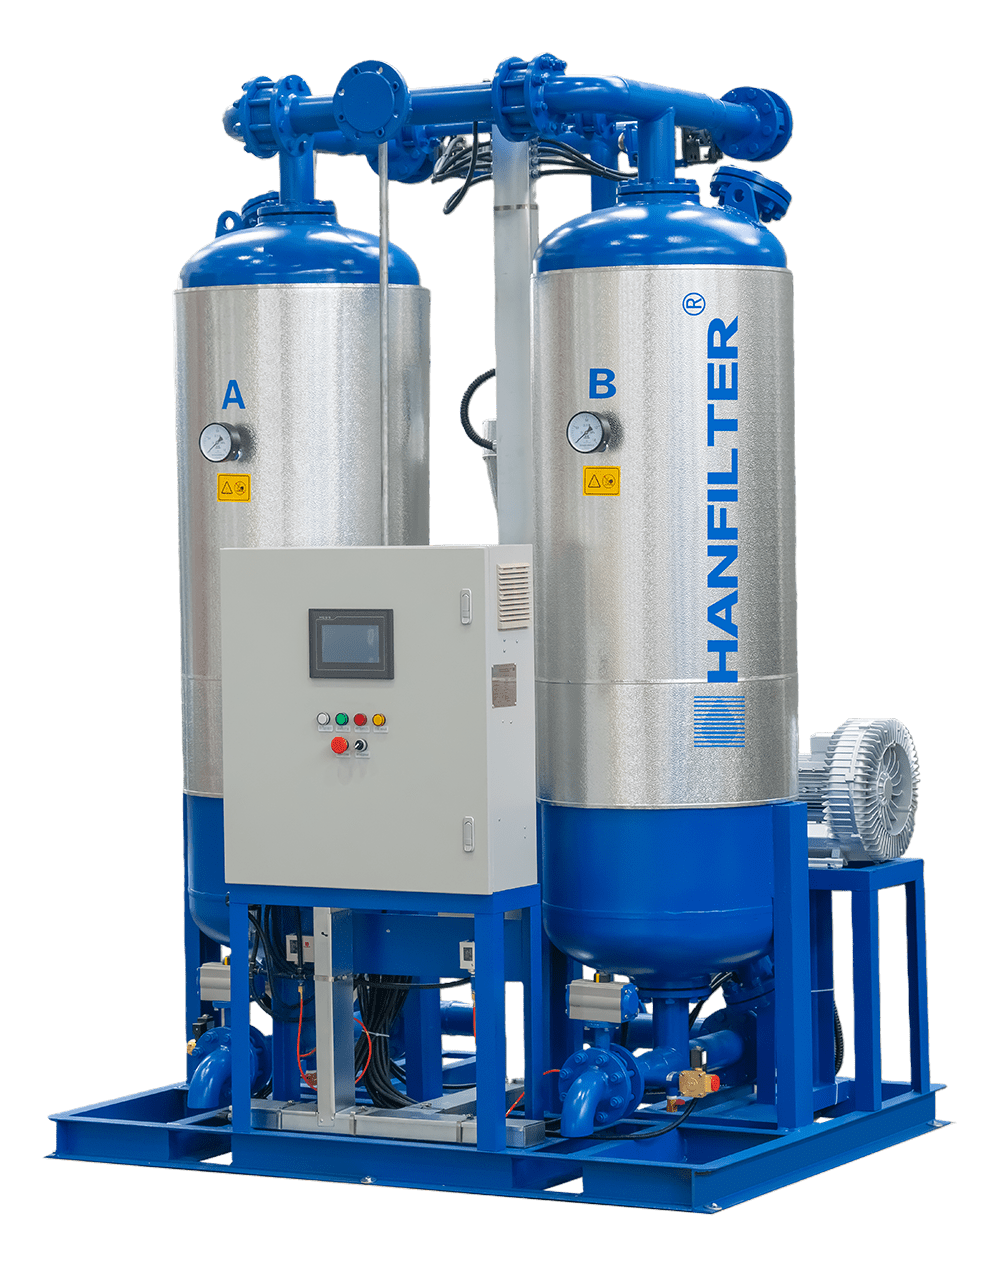 GXF Series Blower Purge Desiccant Compressed Air Drers (Use 1% purge air for desiccant cooling)